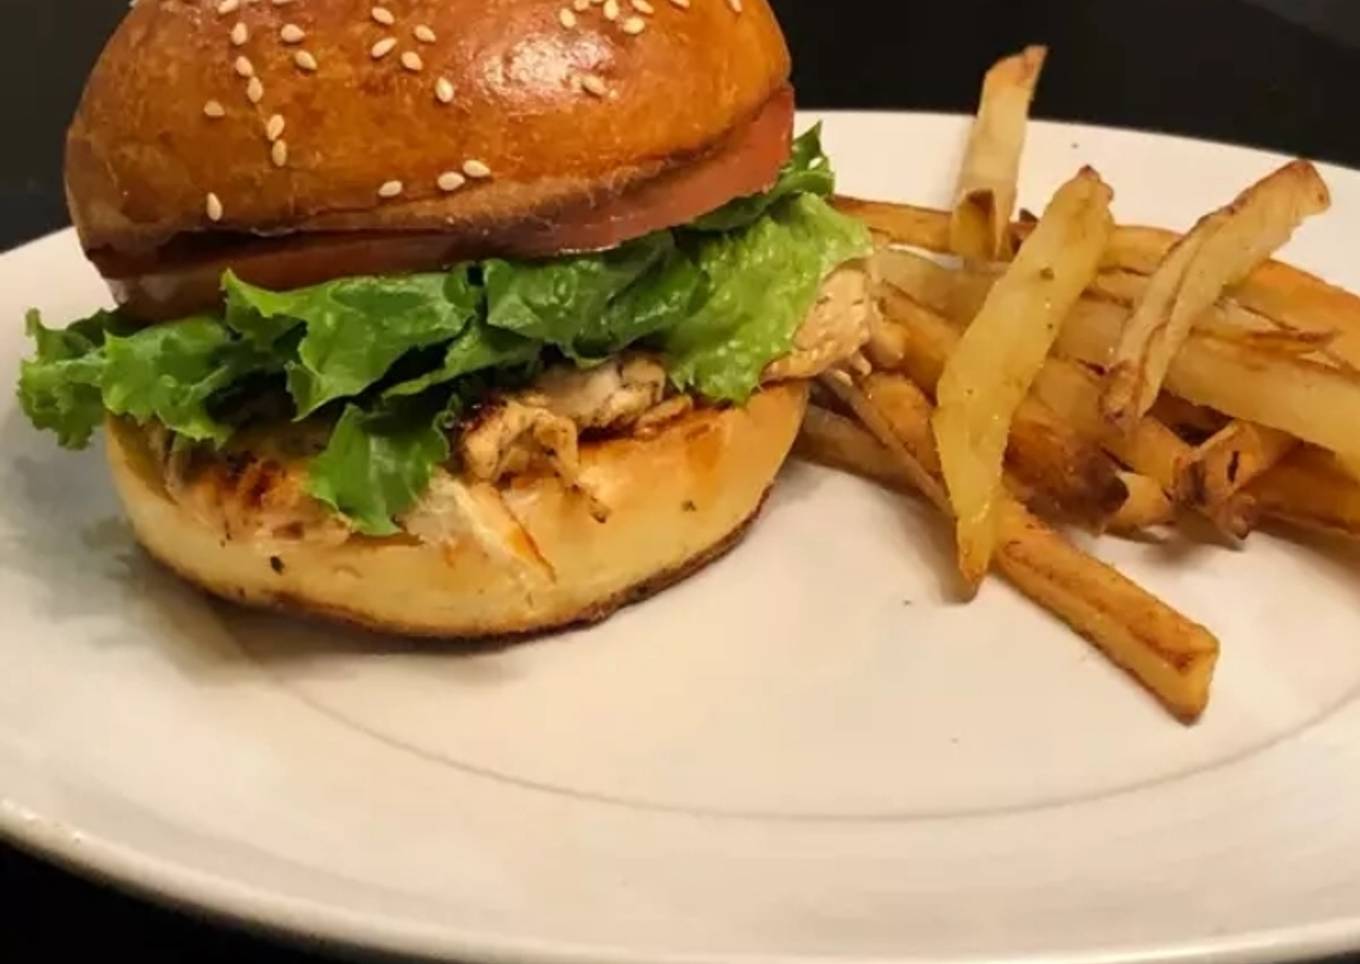 Homemade Chicken burger with vegetables